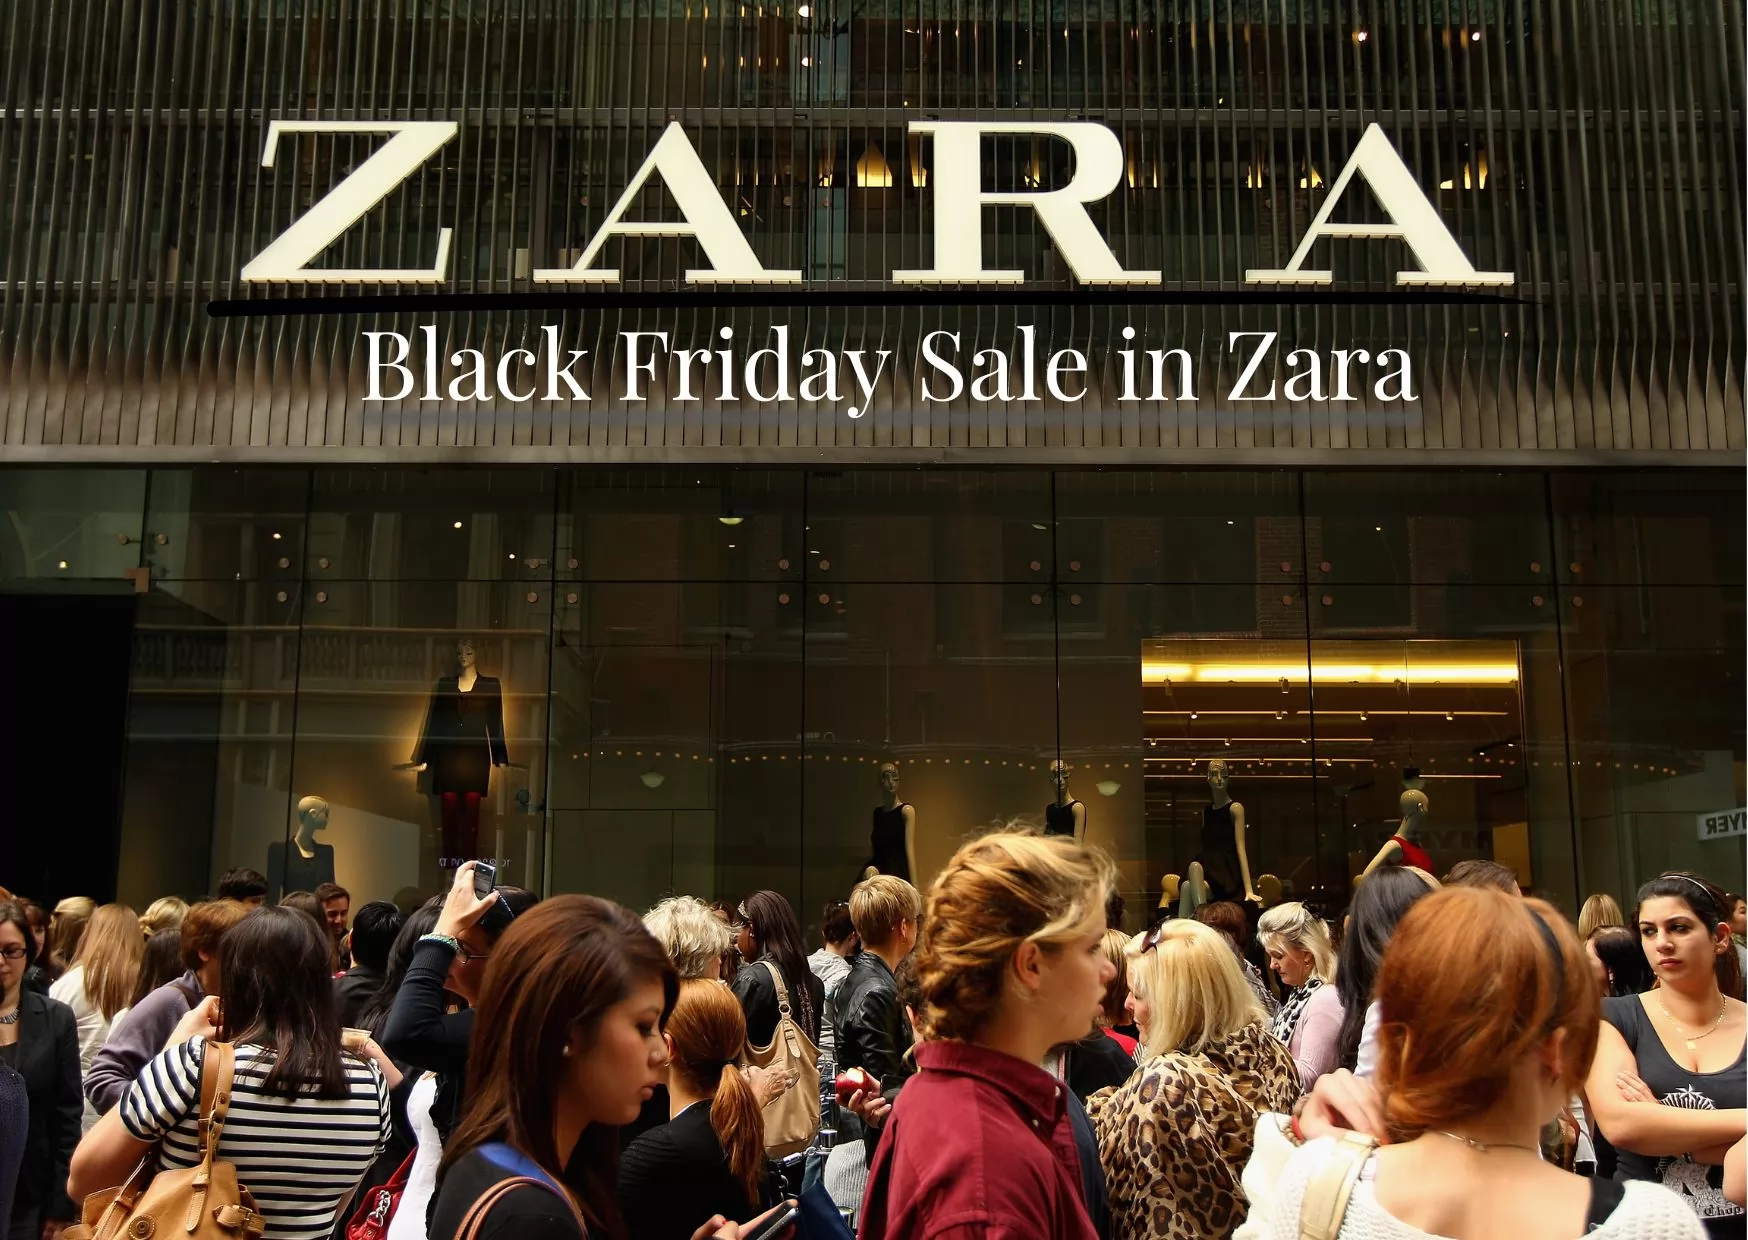 Black Friday Sale in Zara- The Most Awaited Sale of The Year